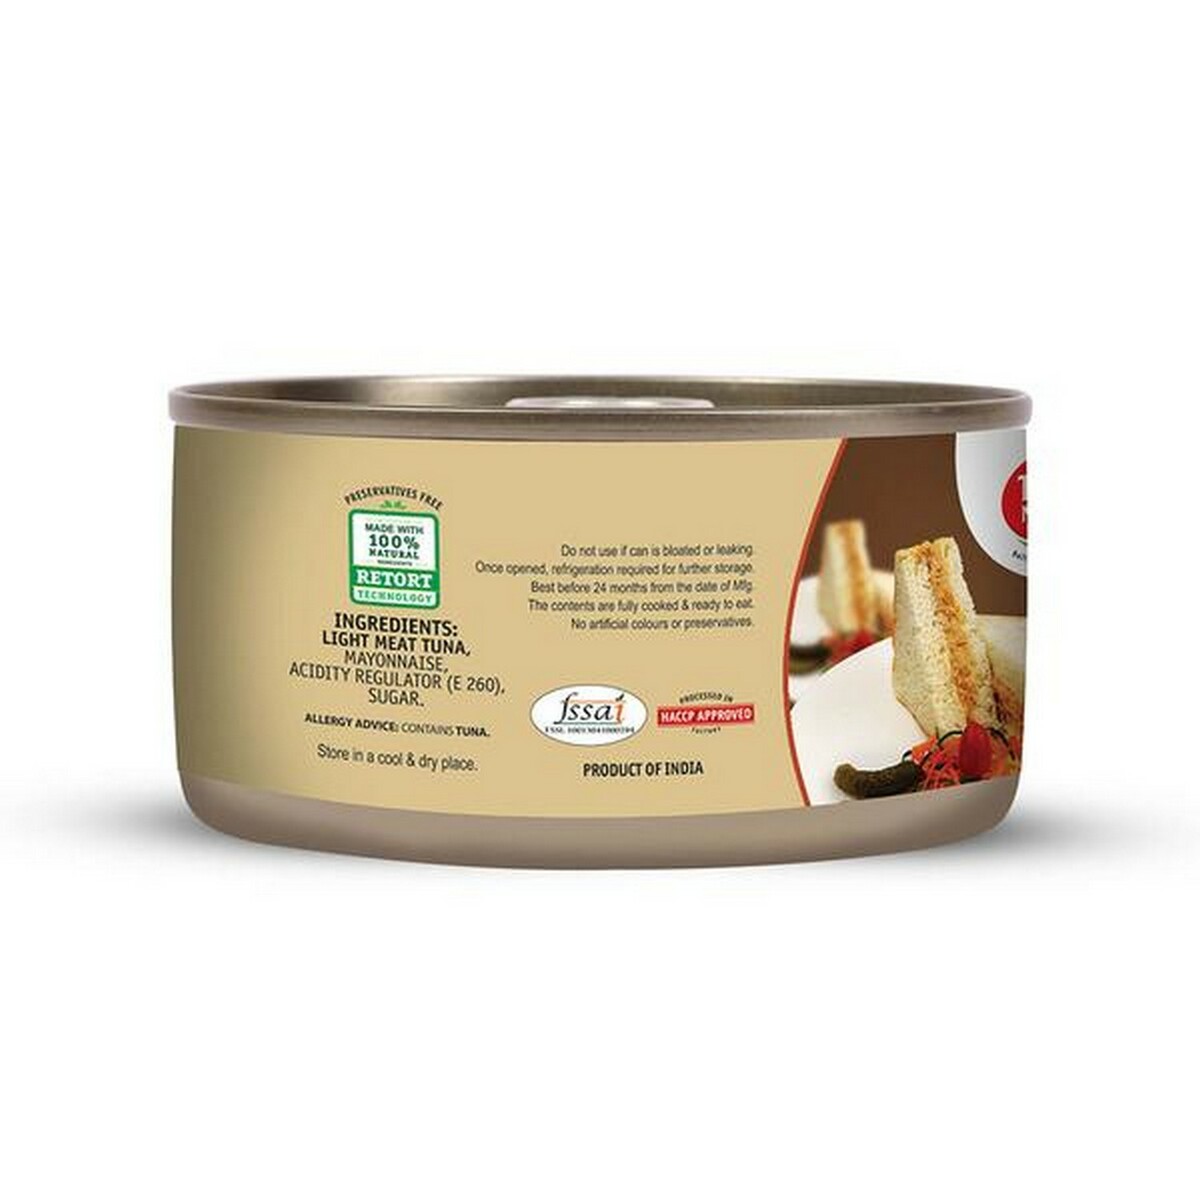 Tasty Nibbles Light Meat Tuna In  Mayonnaise 185G